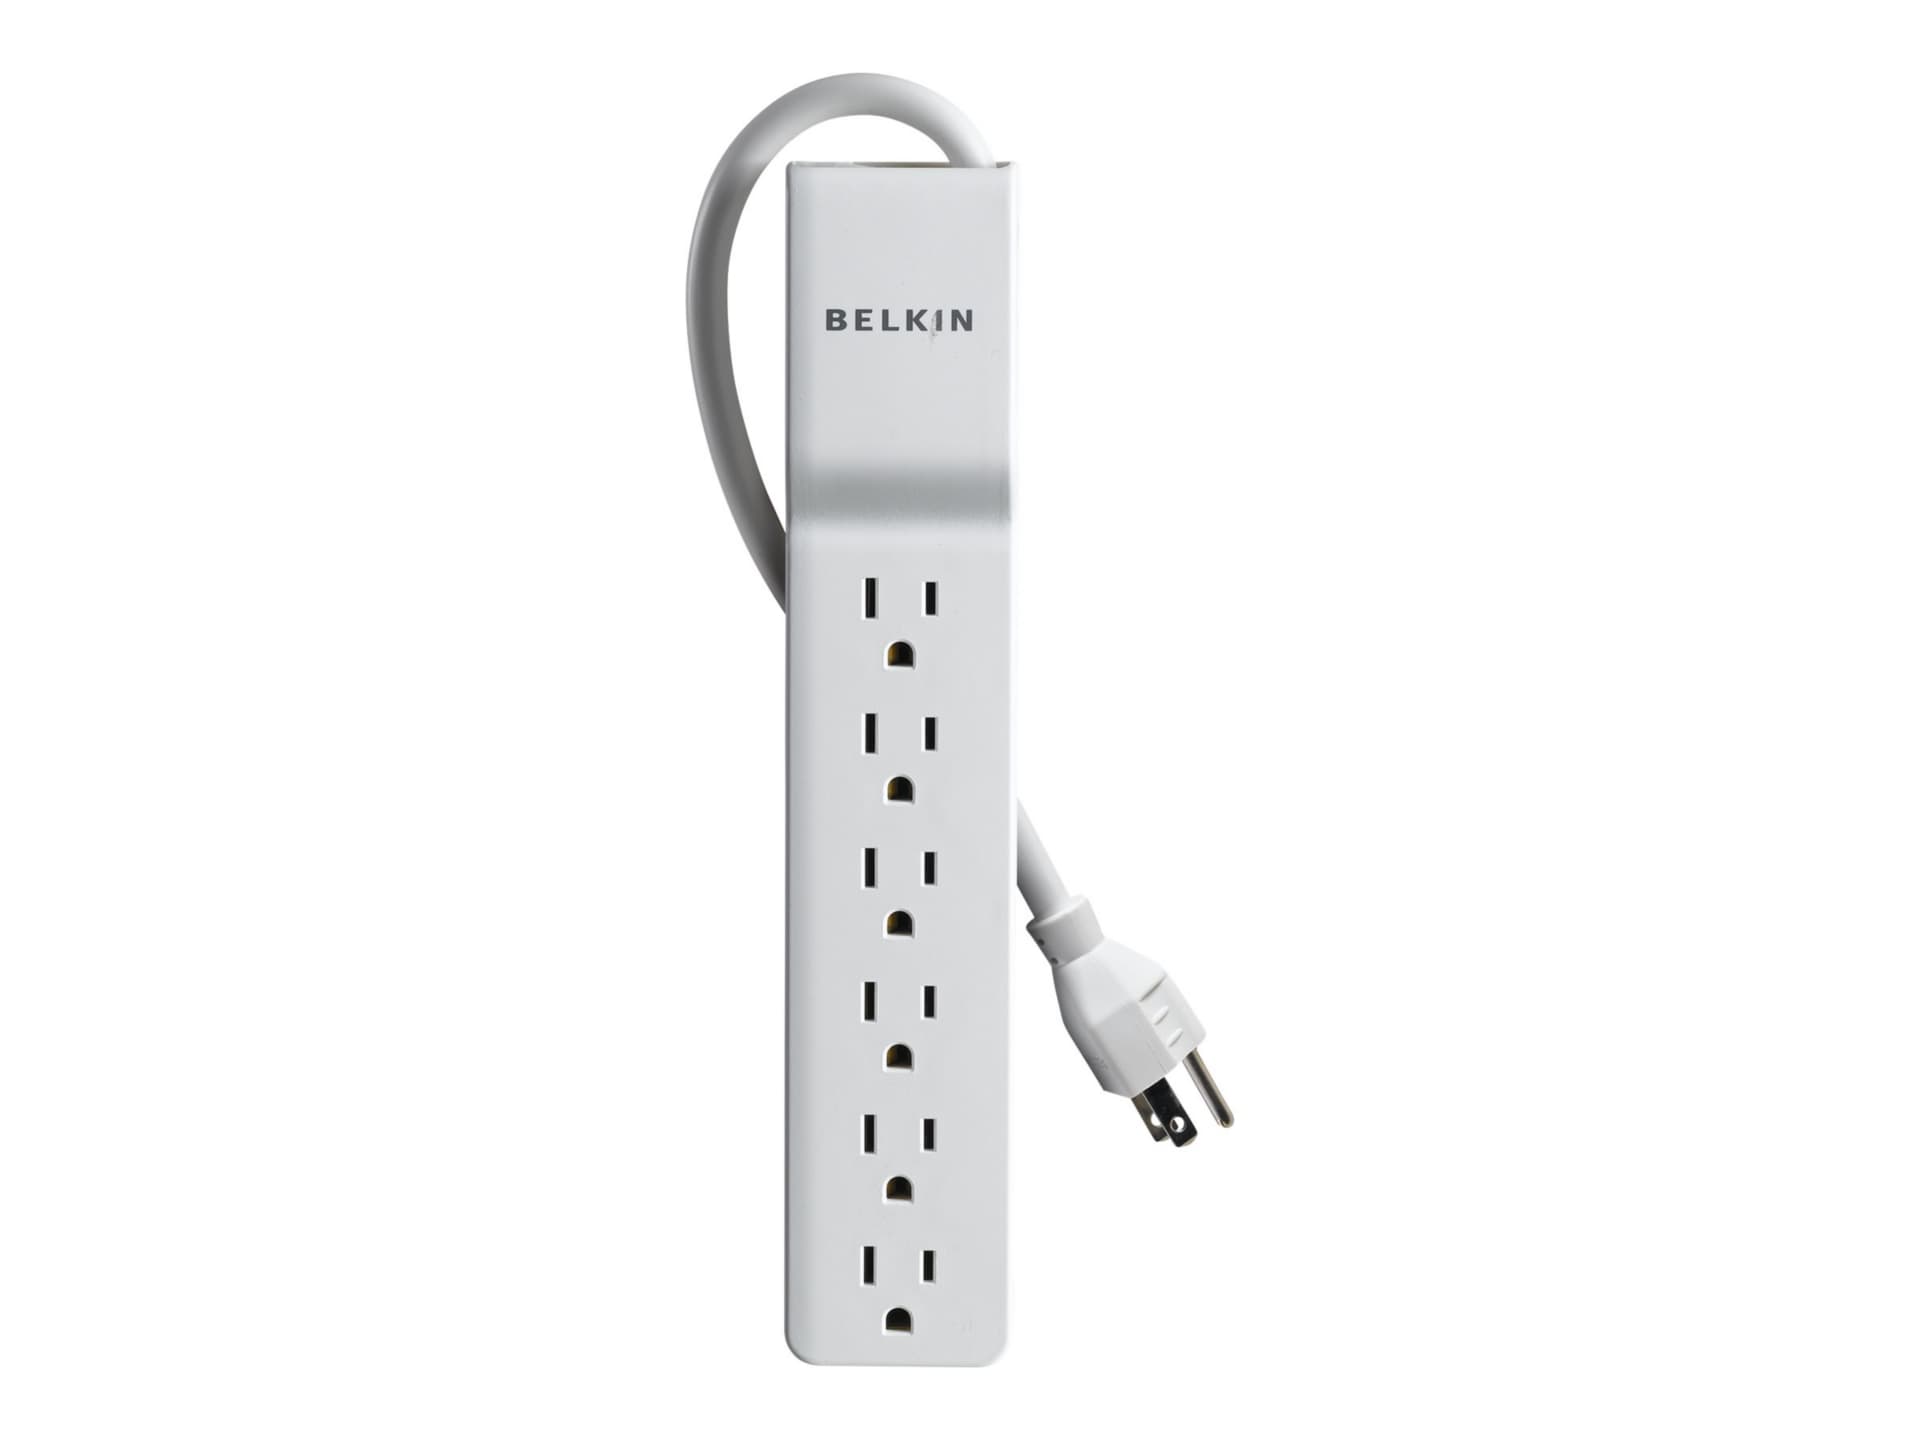 Belkin 6-Outlet Surge Protector - 4ft Cord - Straight Plug - 720J - White